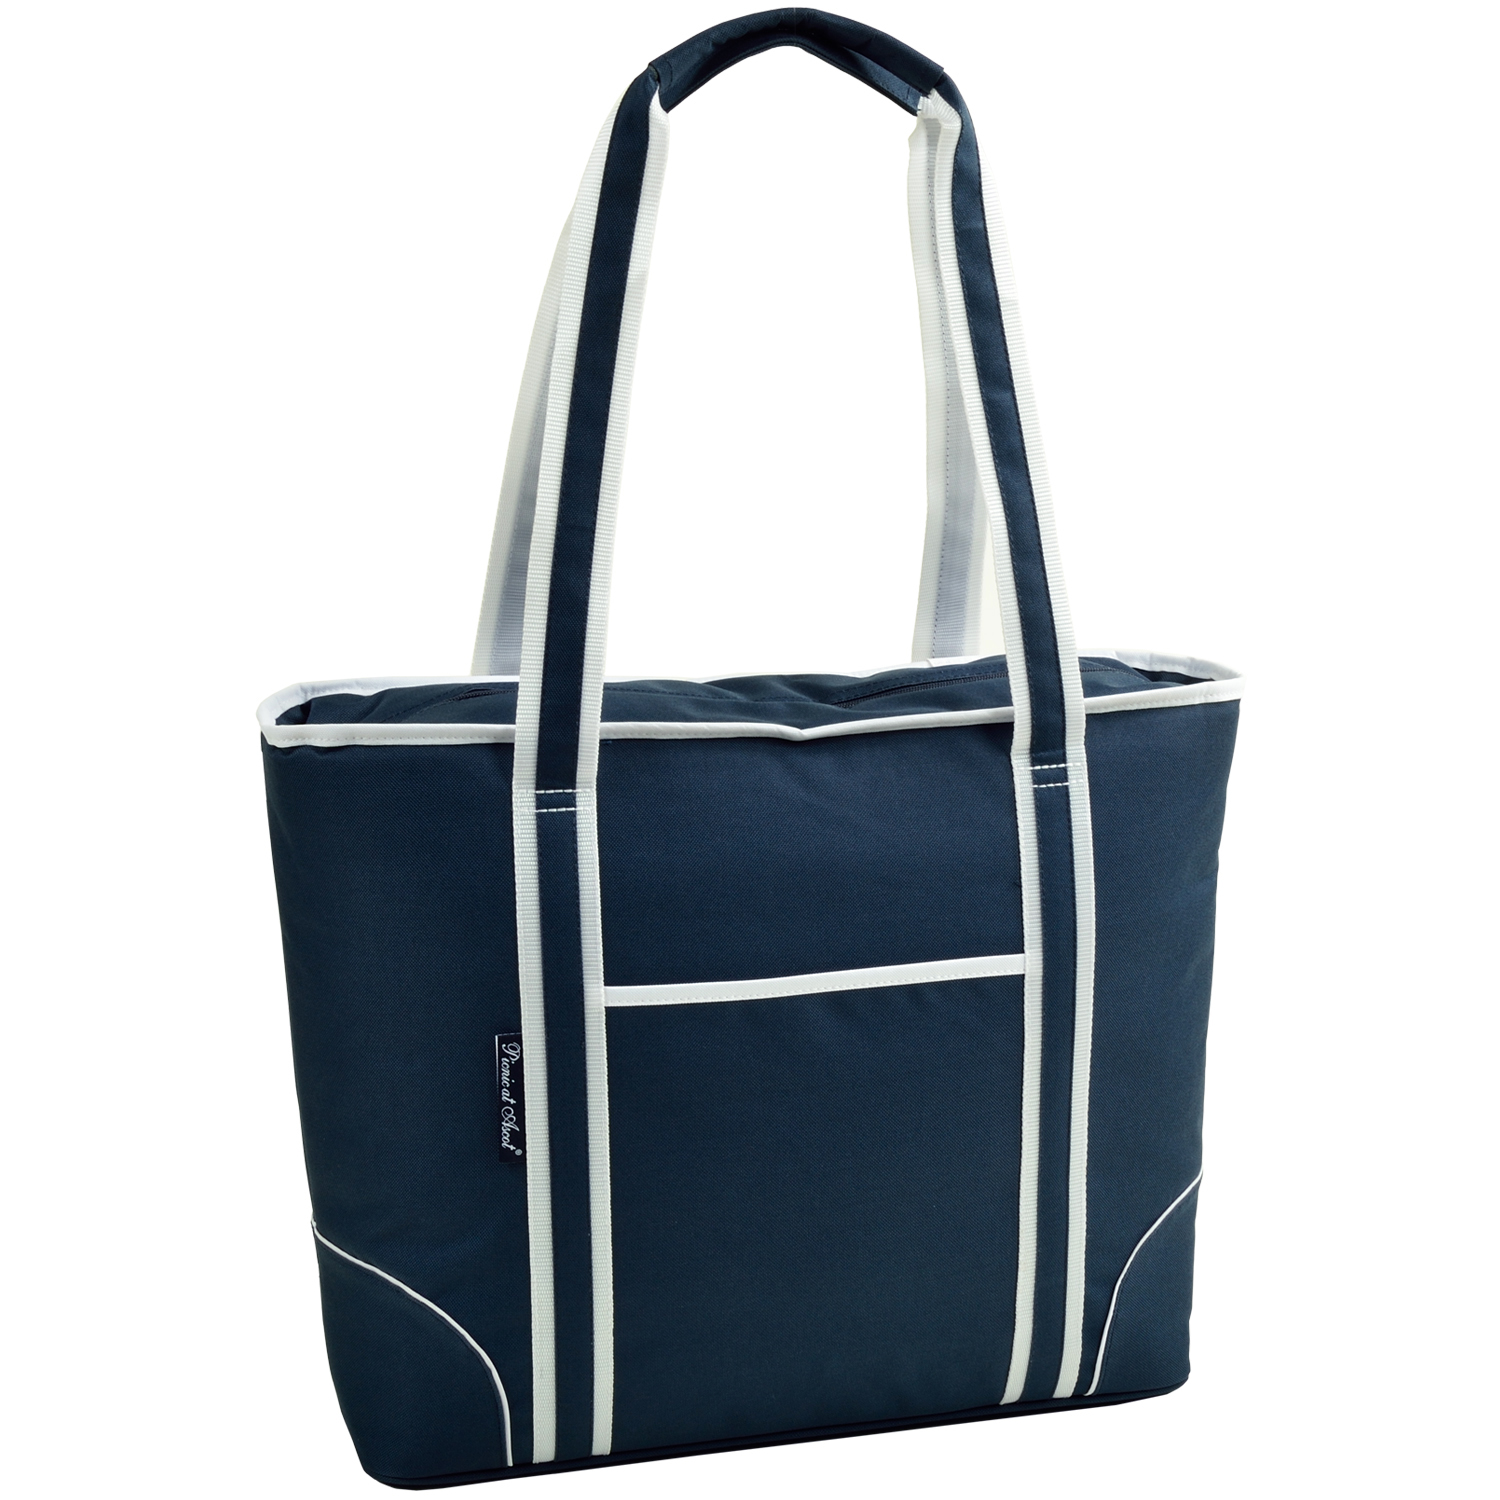 Picture of Picnic at Ascot 421-B Large Insulated Tote in Navy